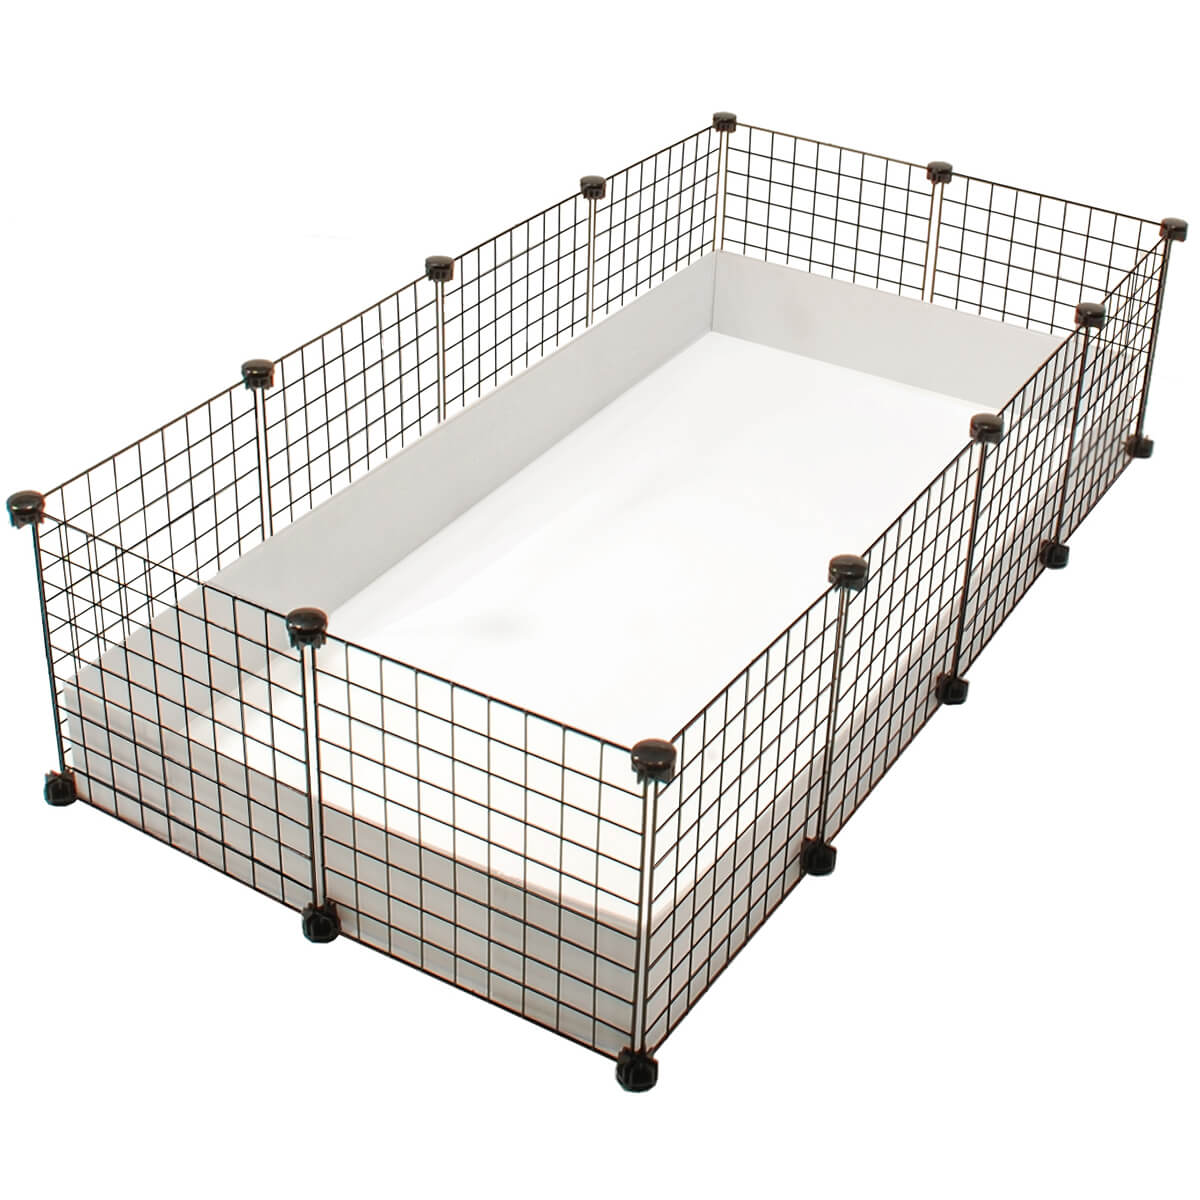 Large (2x4 Grids) Cage - Standard Cages 